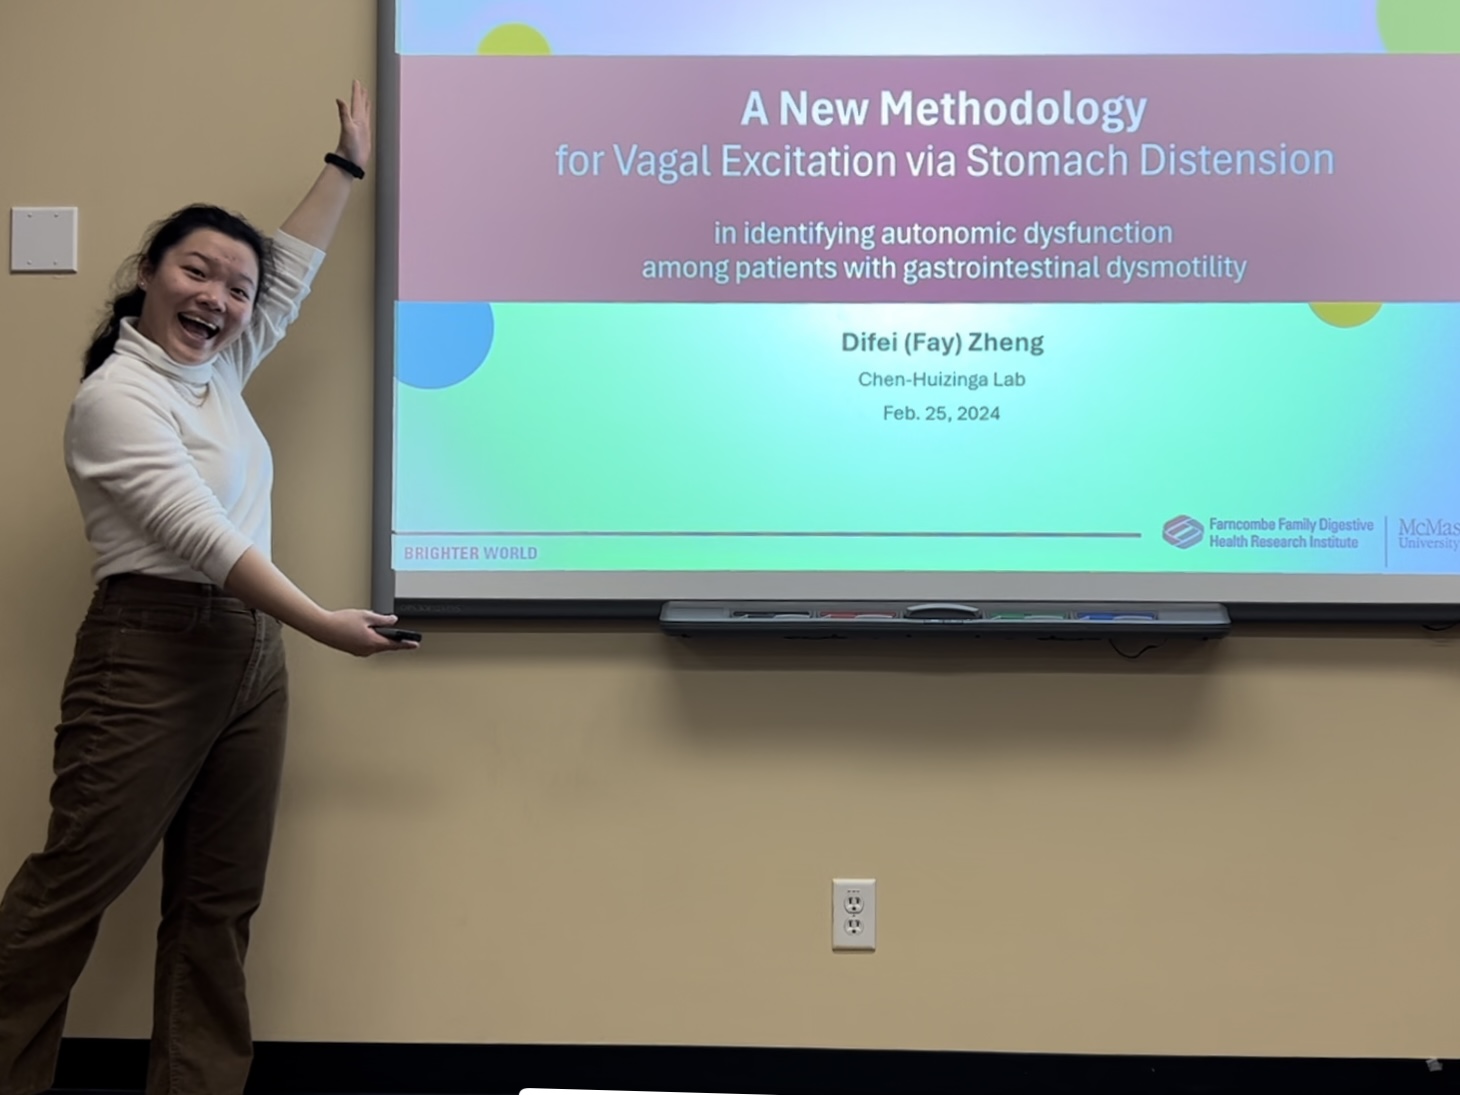 Difei (Fay) Zheng posing by a screen that is displaying a PowerPoint presentation 